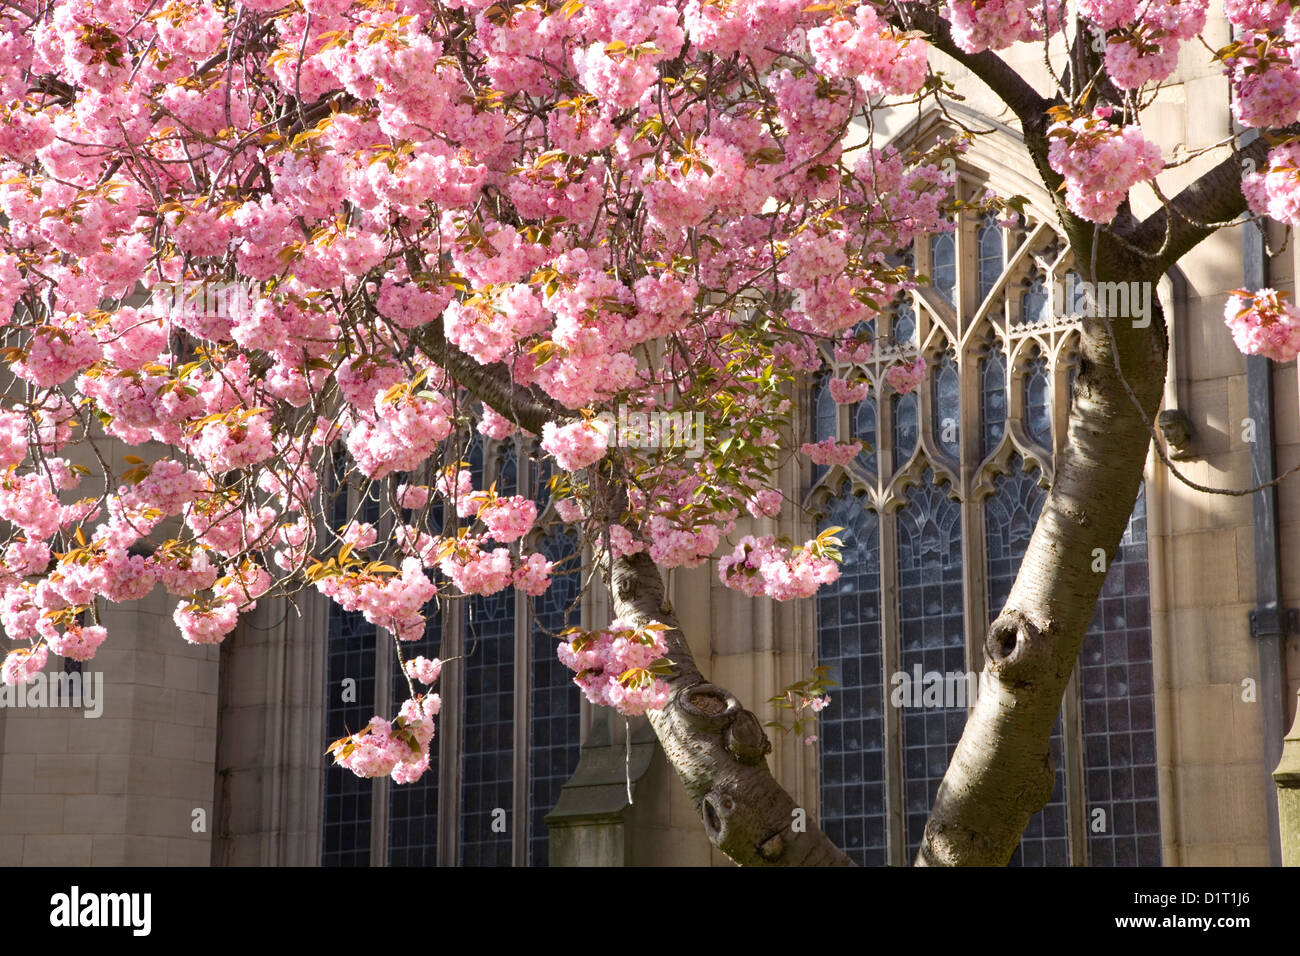 Cherry blossoms dating site in Manchester